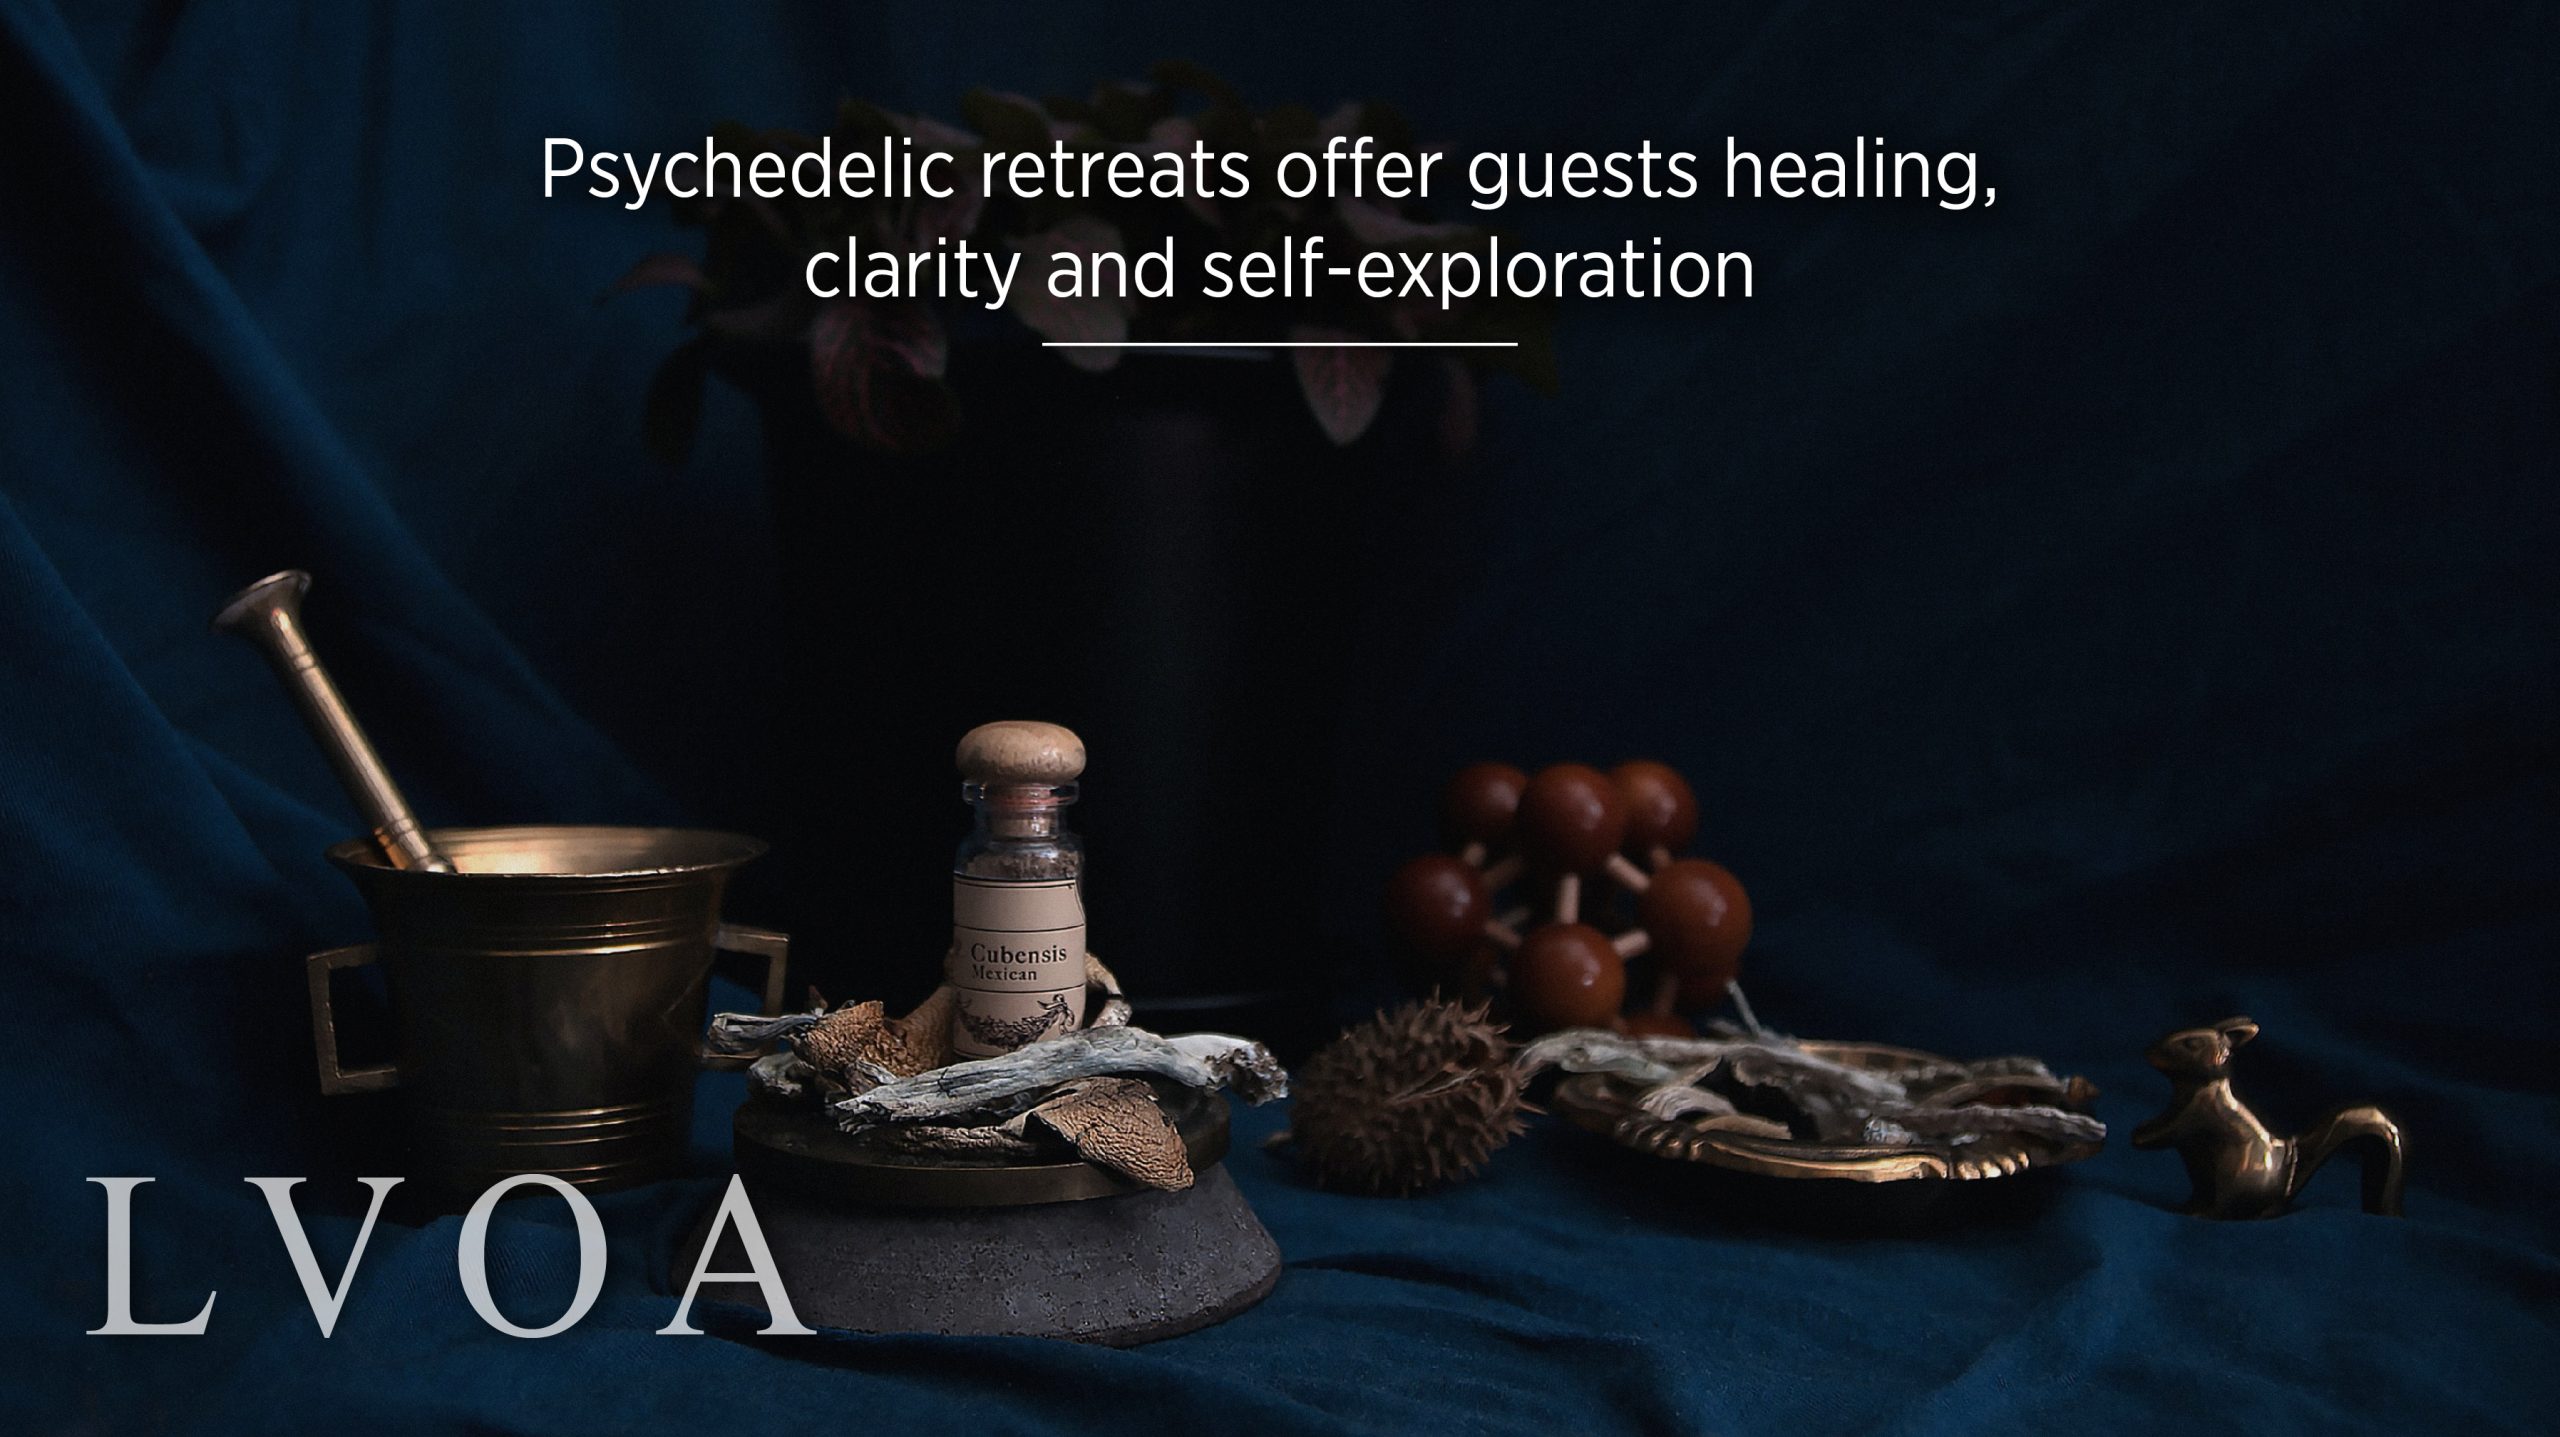 Psychedelic retreats offer guests healing, clarity and self-exploration